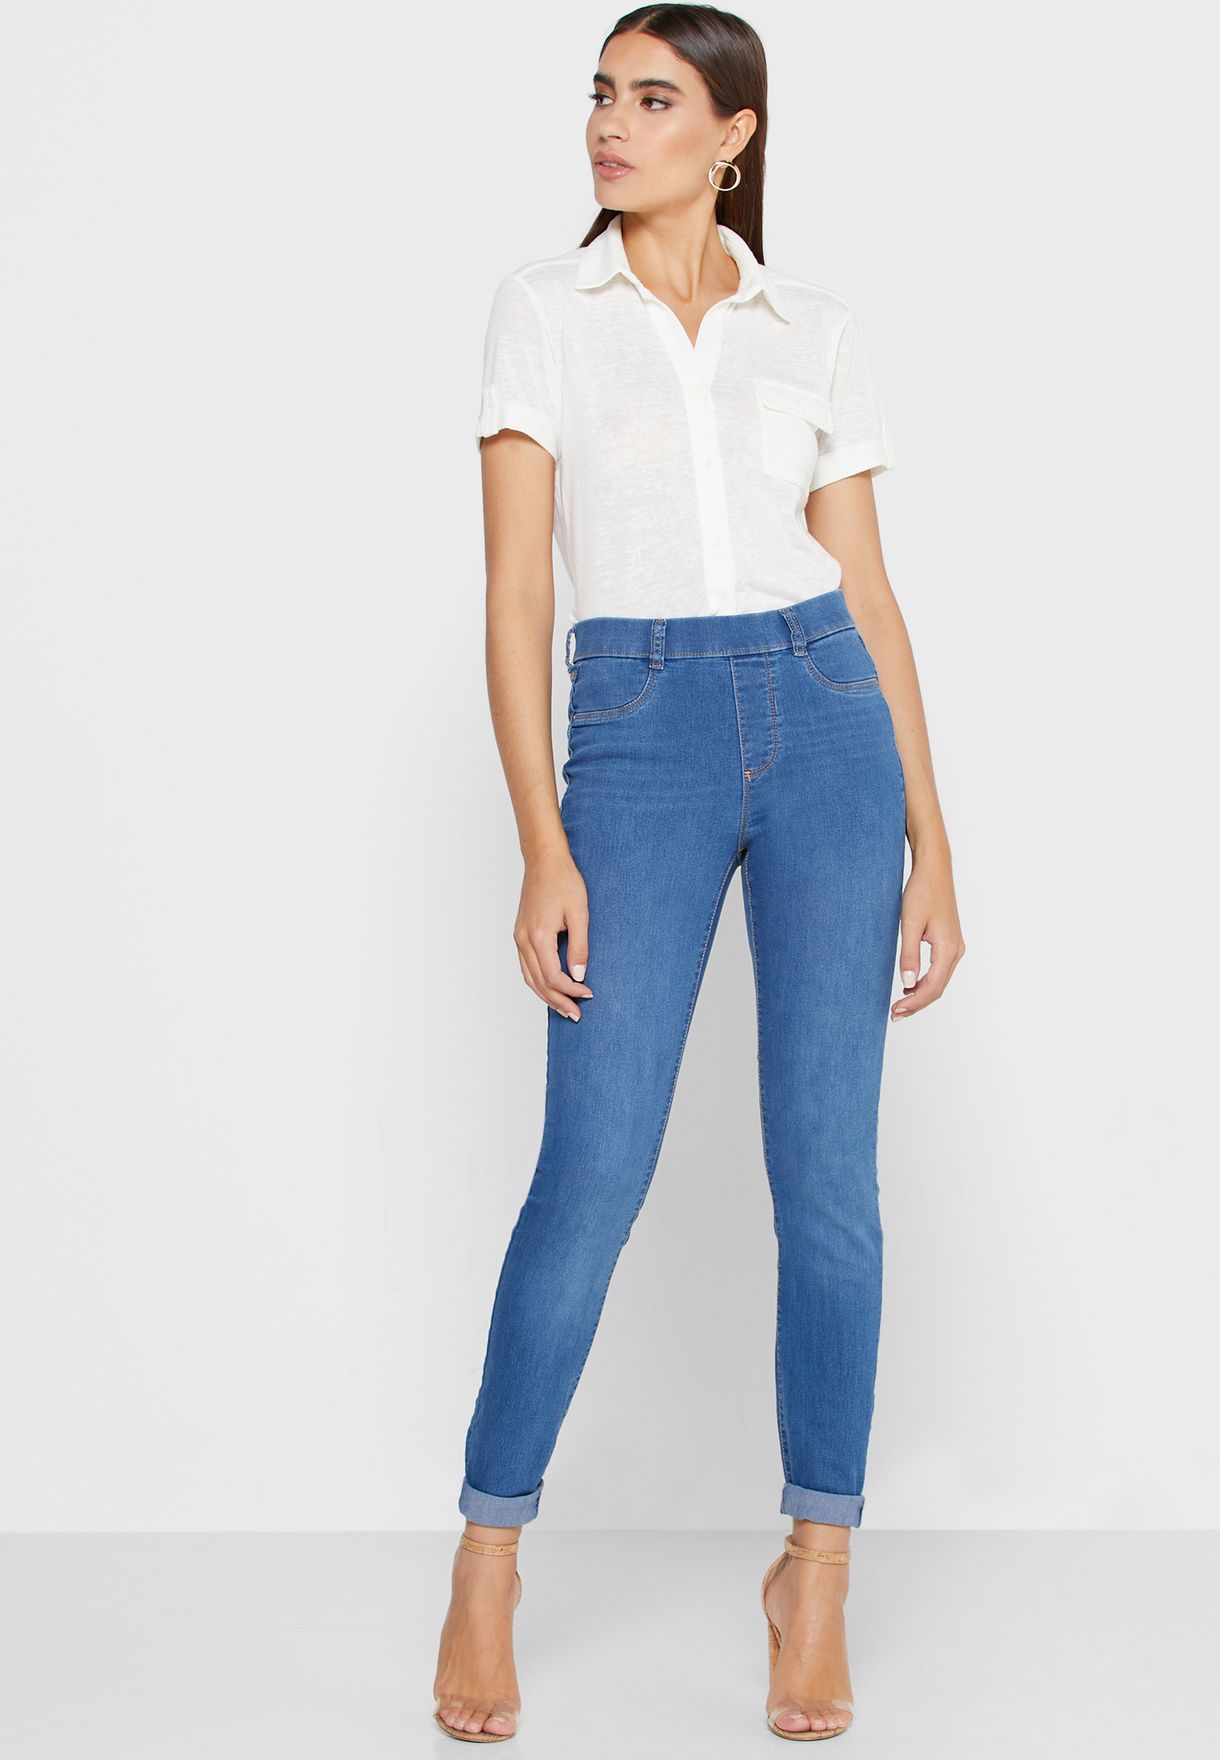 dorothy perkins tall jeans